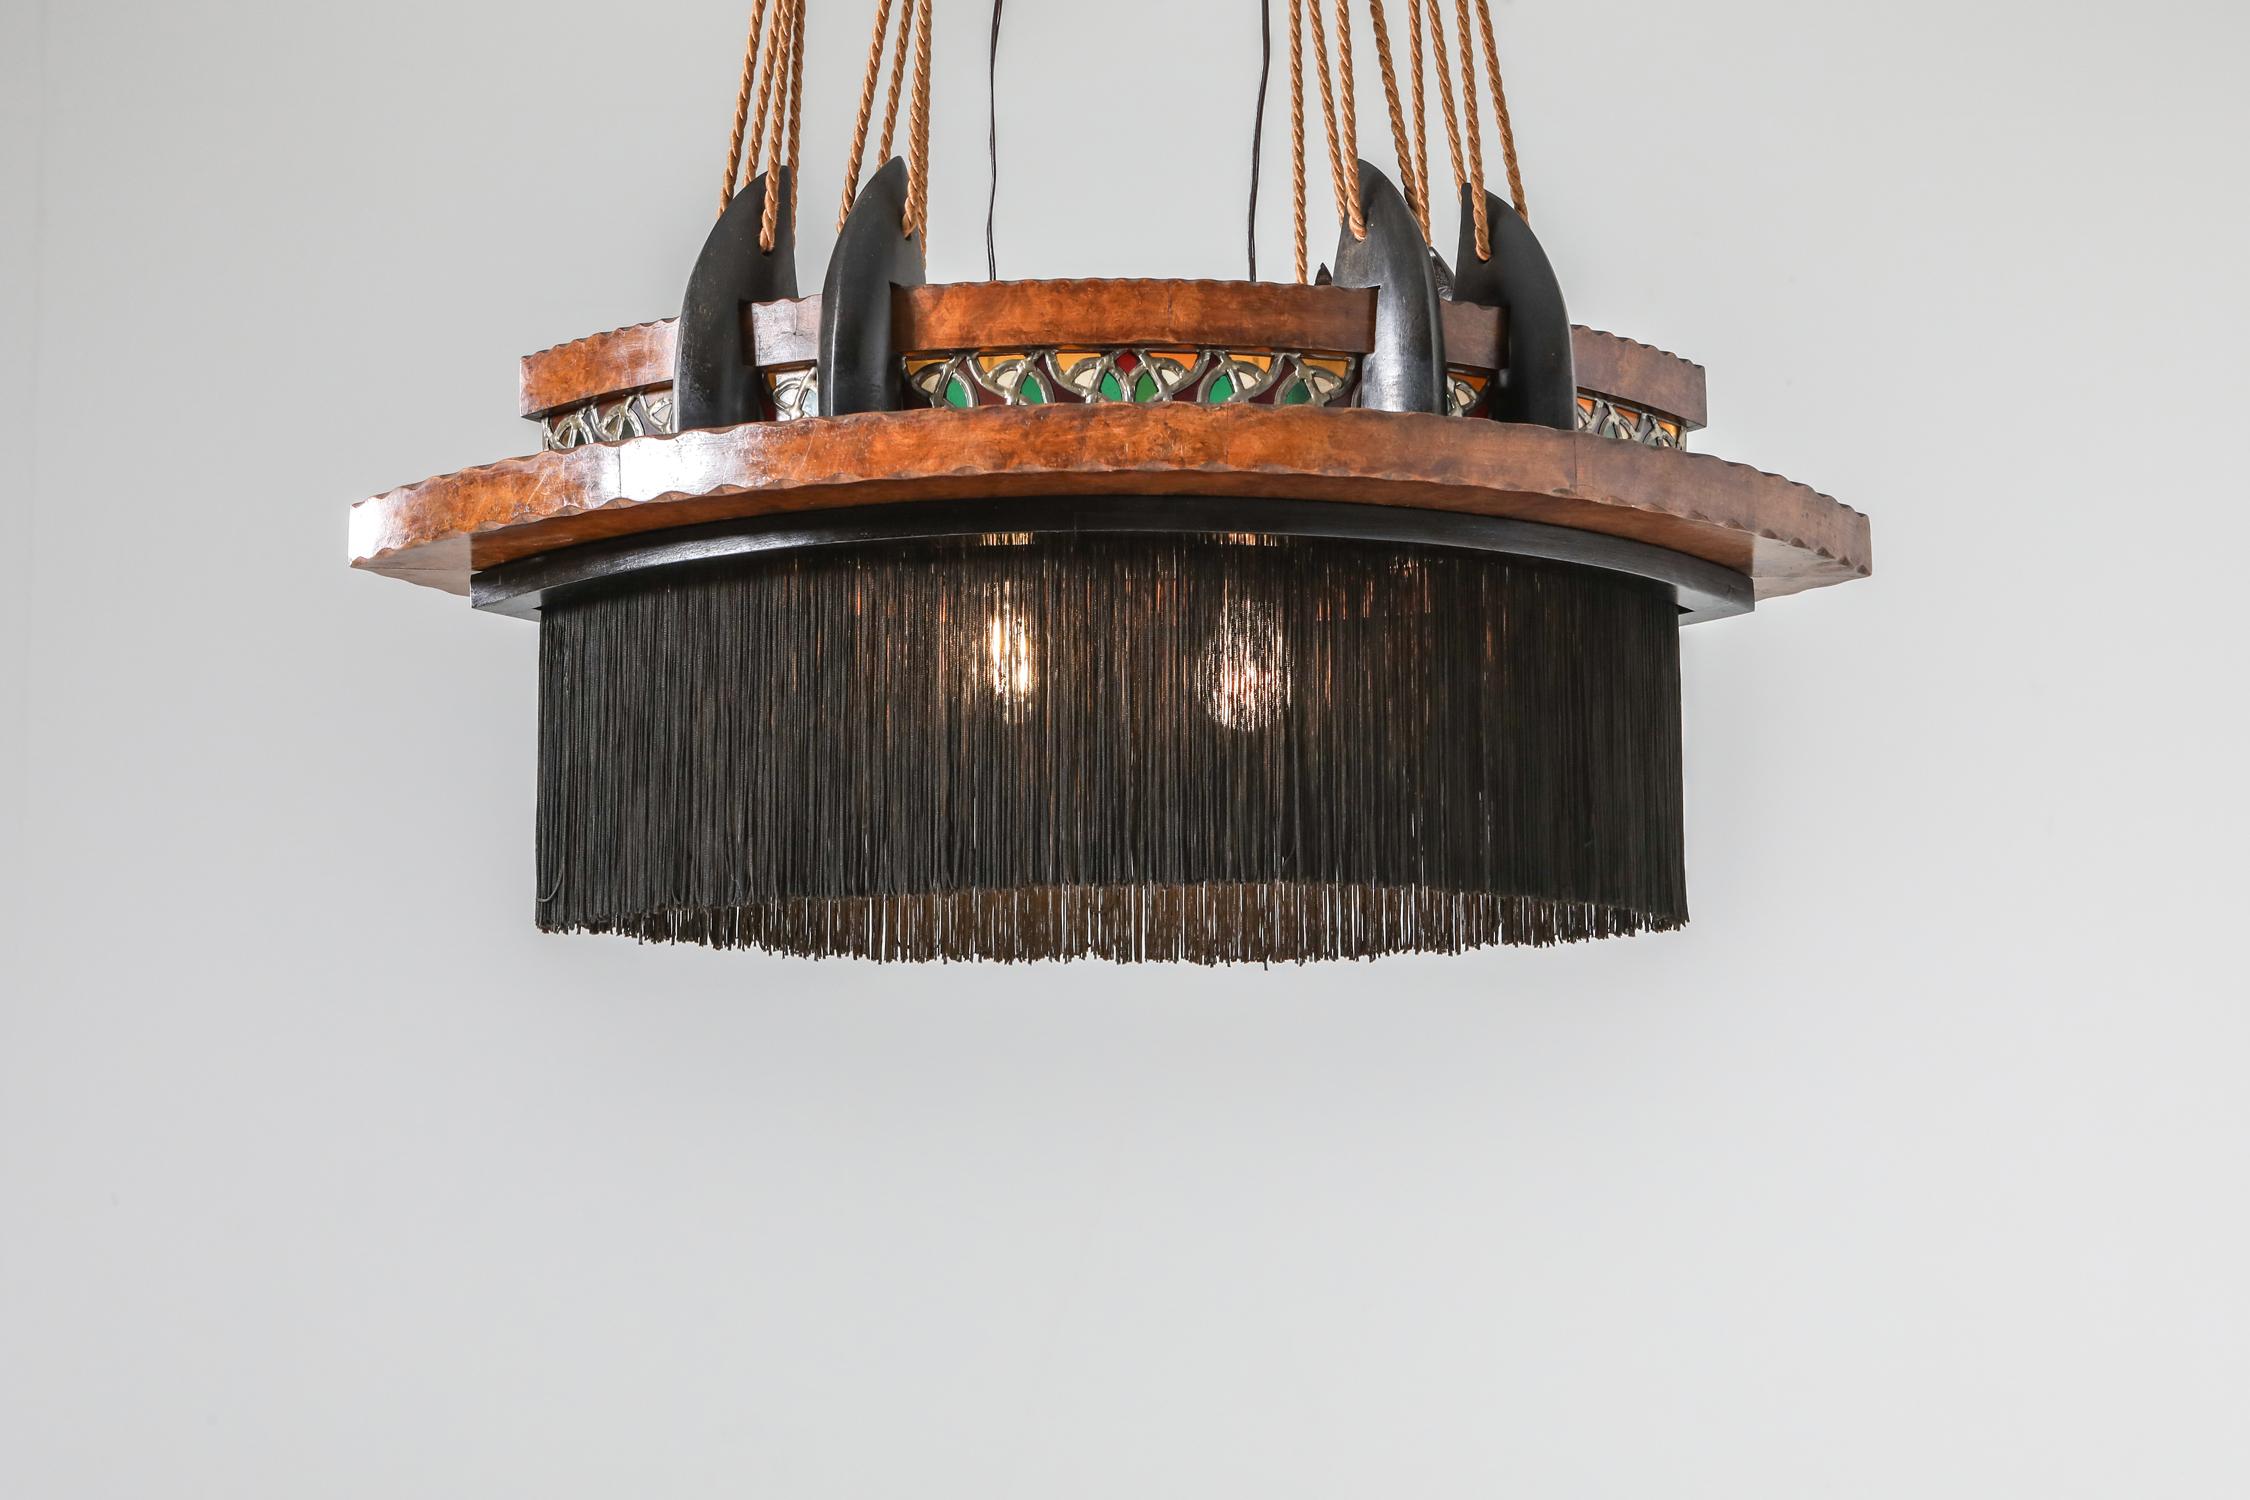 Dutch Art Deco era chandelier, Amsterdam School, 1920s

Expressionist piece with exuberant details like the multicolored glass in lead, the silk fringes, the carved fruitwood and the ebonized and carved details.
The chandelier also has the almond